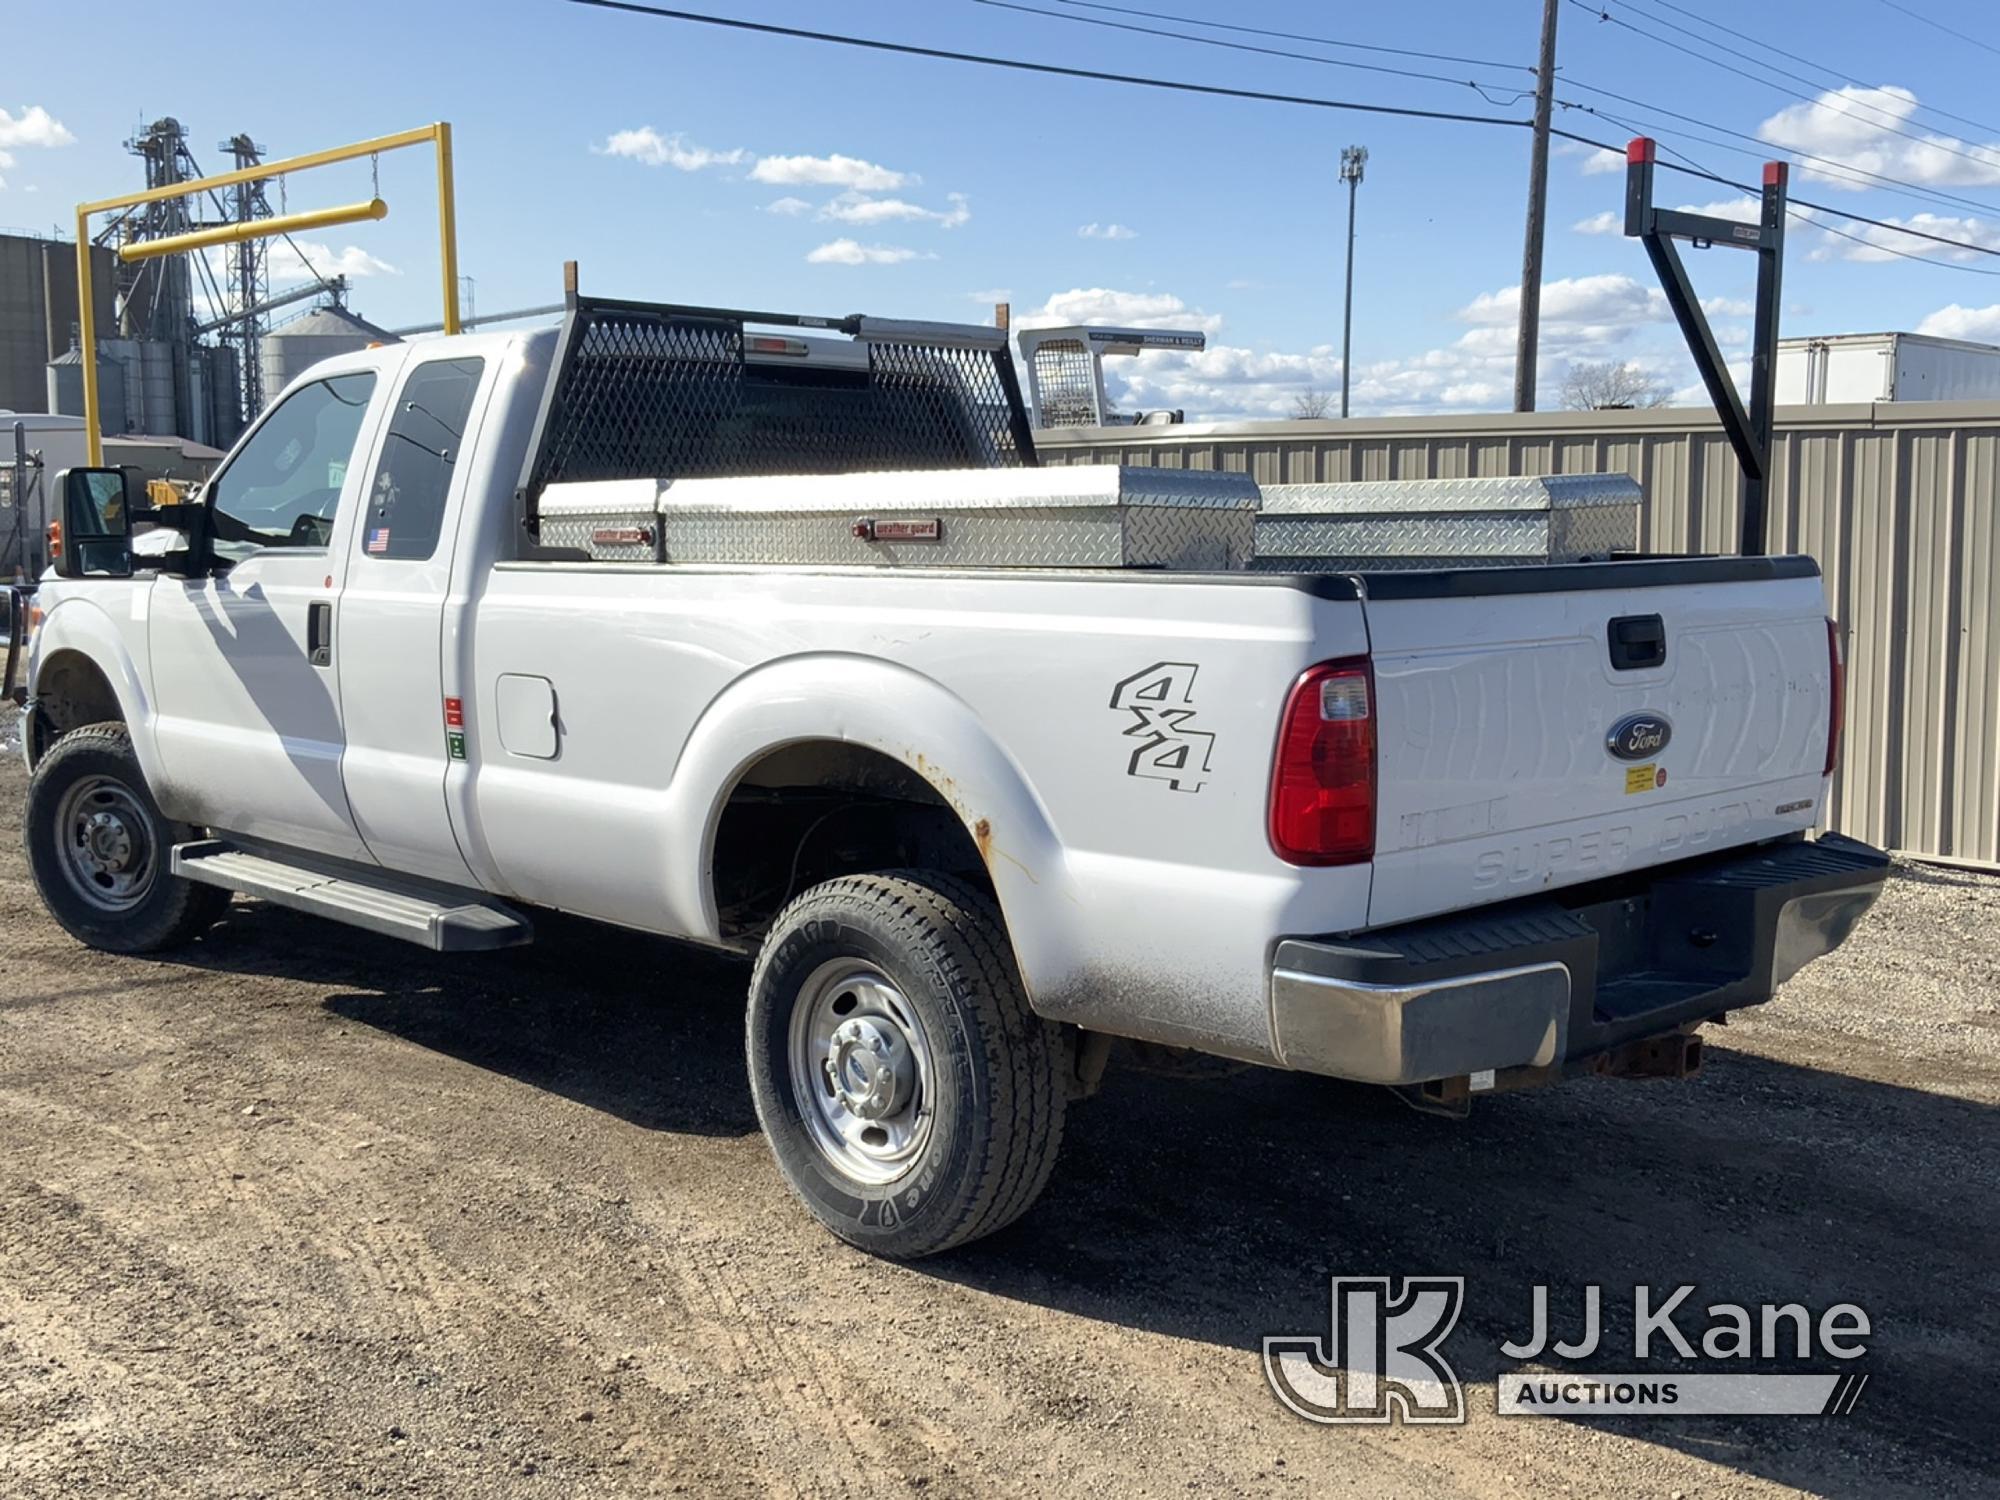 (South Beloit, IL) 2016 Ford F250 4x4 Extended-Cab Pickup Truck Runs & Moves) (Body Damage